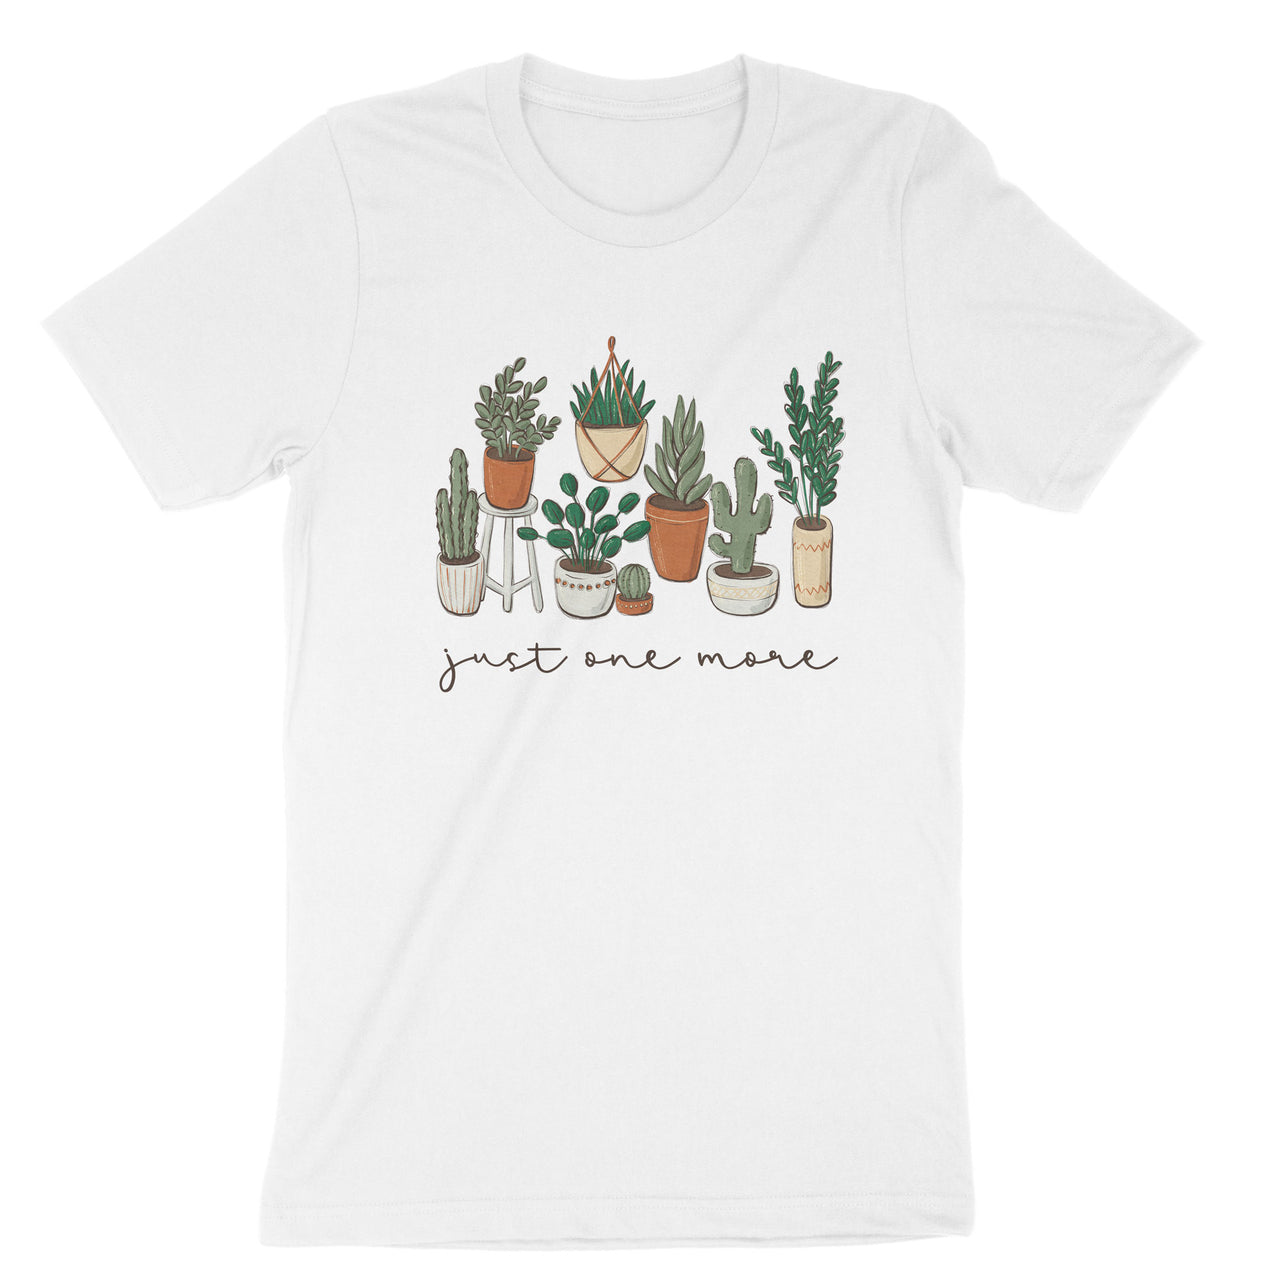 Plant LoverT-Shirt, Just One More Plant Tee Shirt